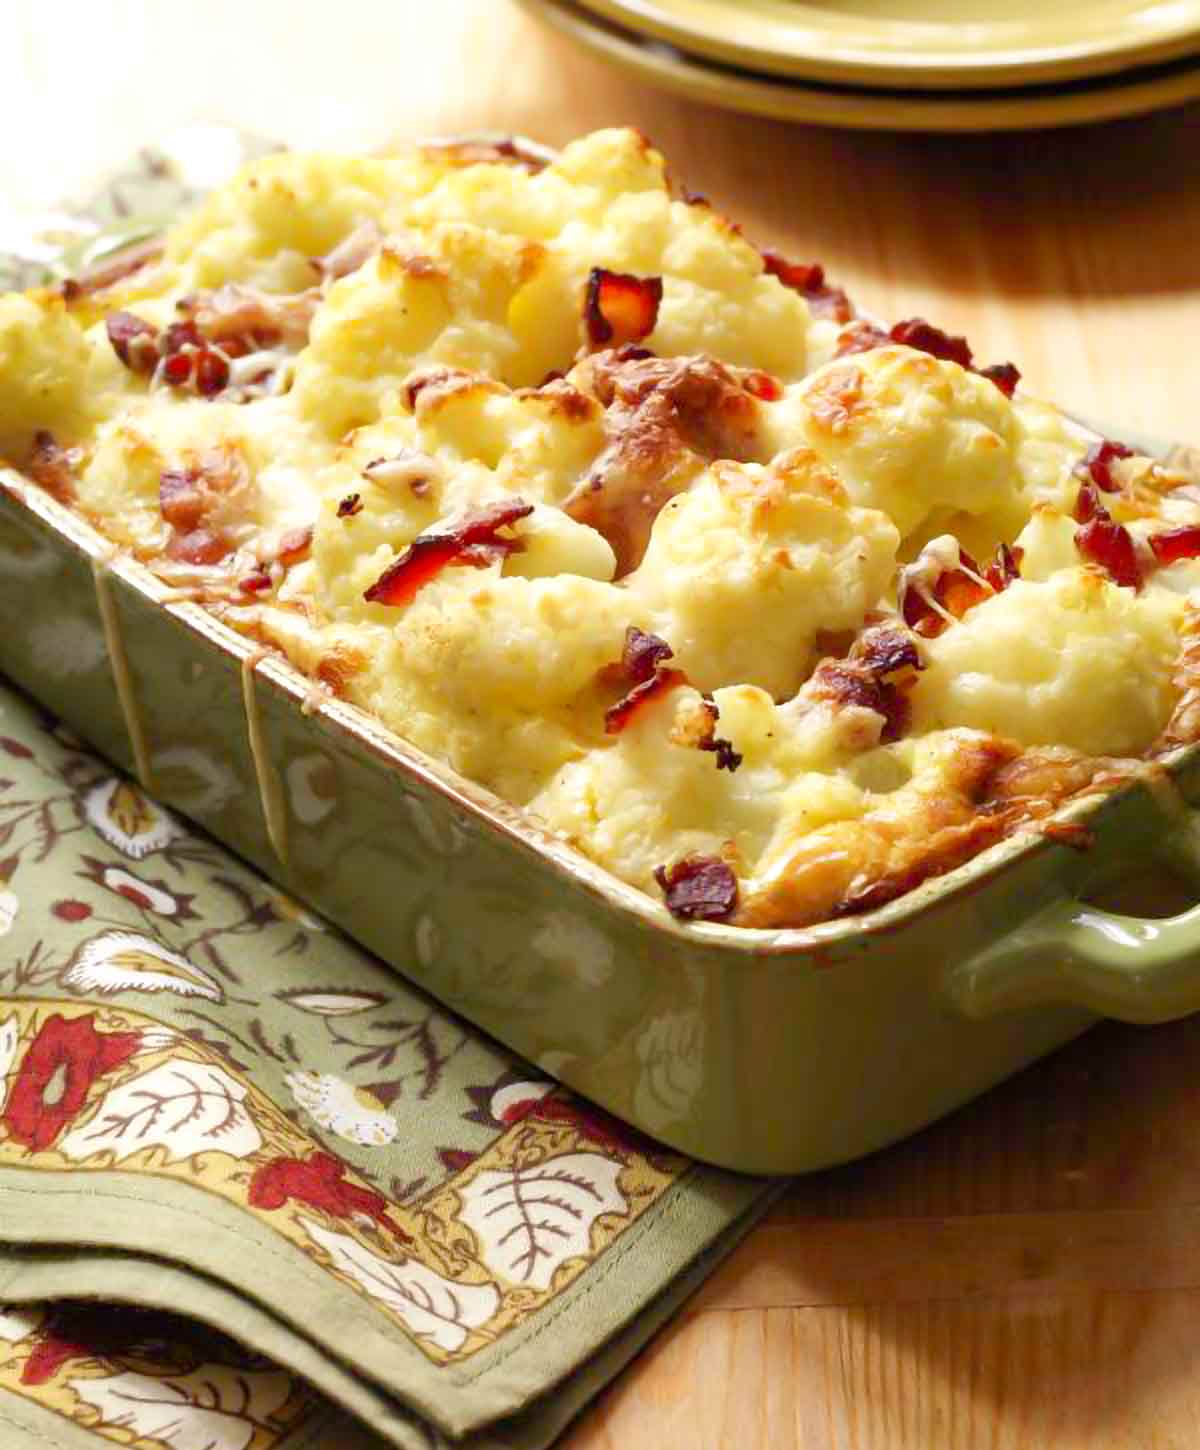 Cauliflower bacon gratin in a large green rectangular baking dish with melted cheese.